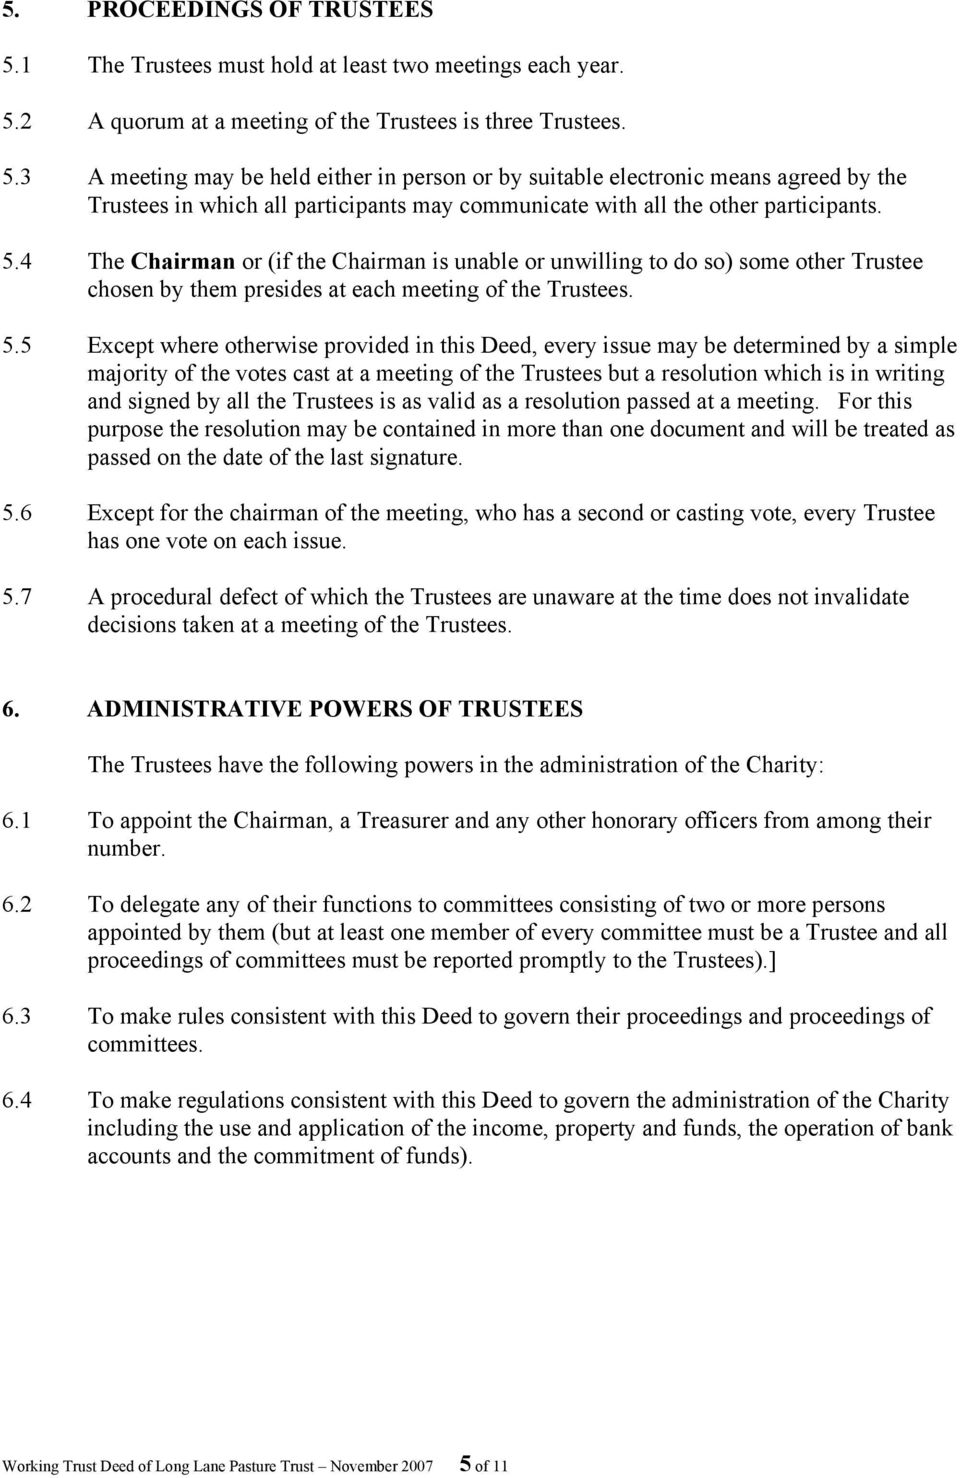 5 Except where otherwise provided in this Deed, every issue may be determined by a simple majority of the votes cast at a meeting of the Trustees but a resolution which is in writing and signed by